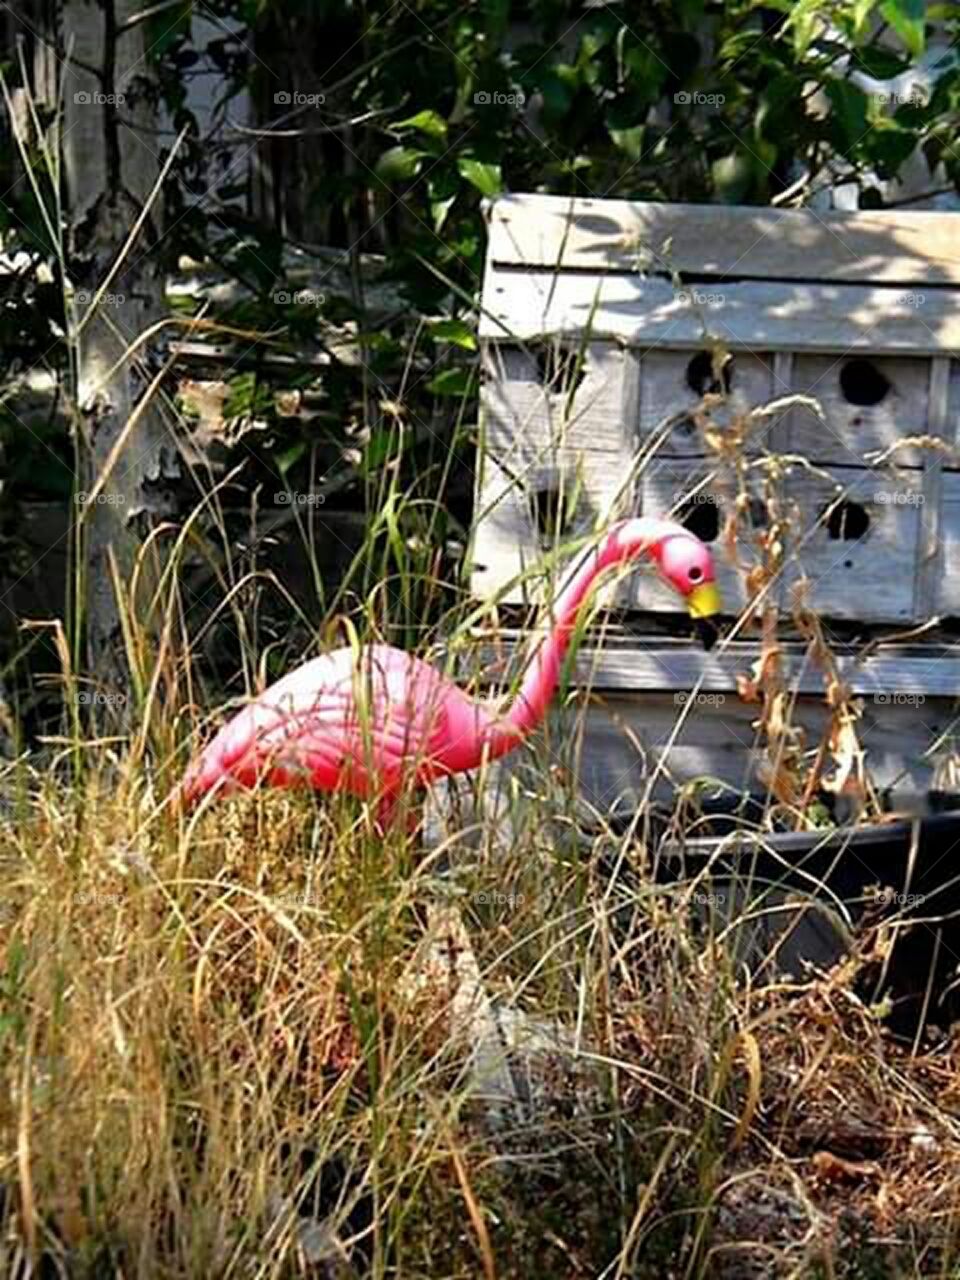 flamingos yard ornament in some weeds